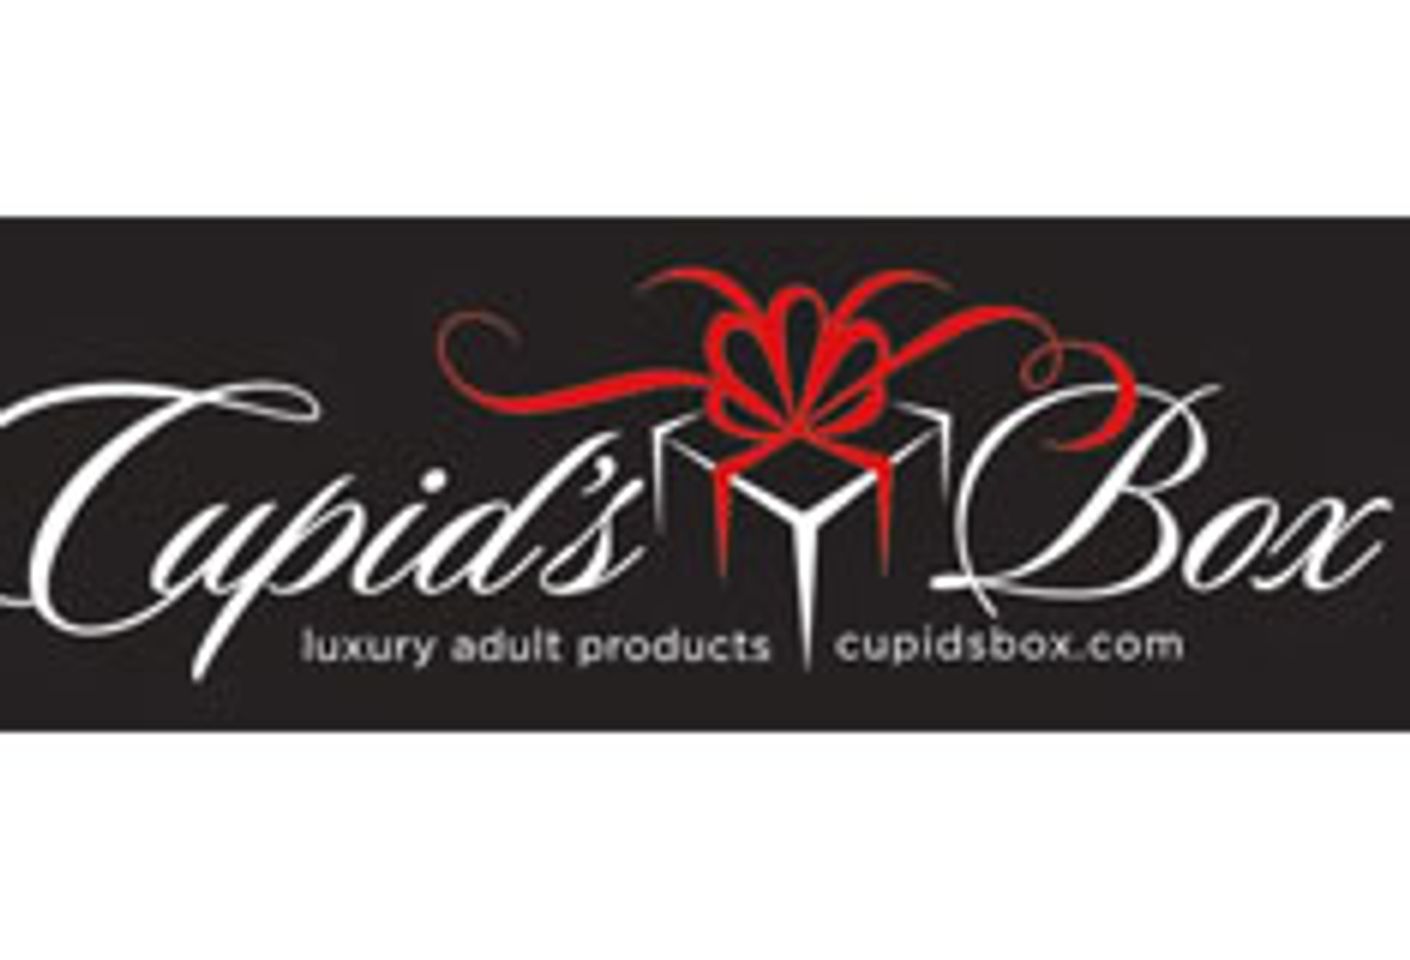 CupidsBox.com Plays Santa With Winter Product Giveaways